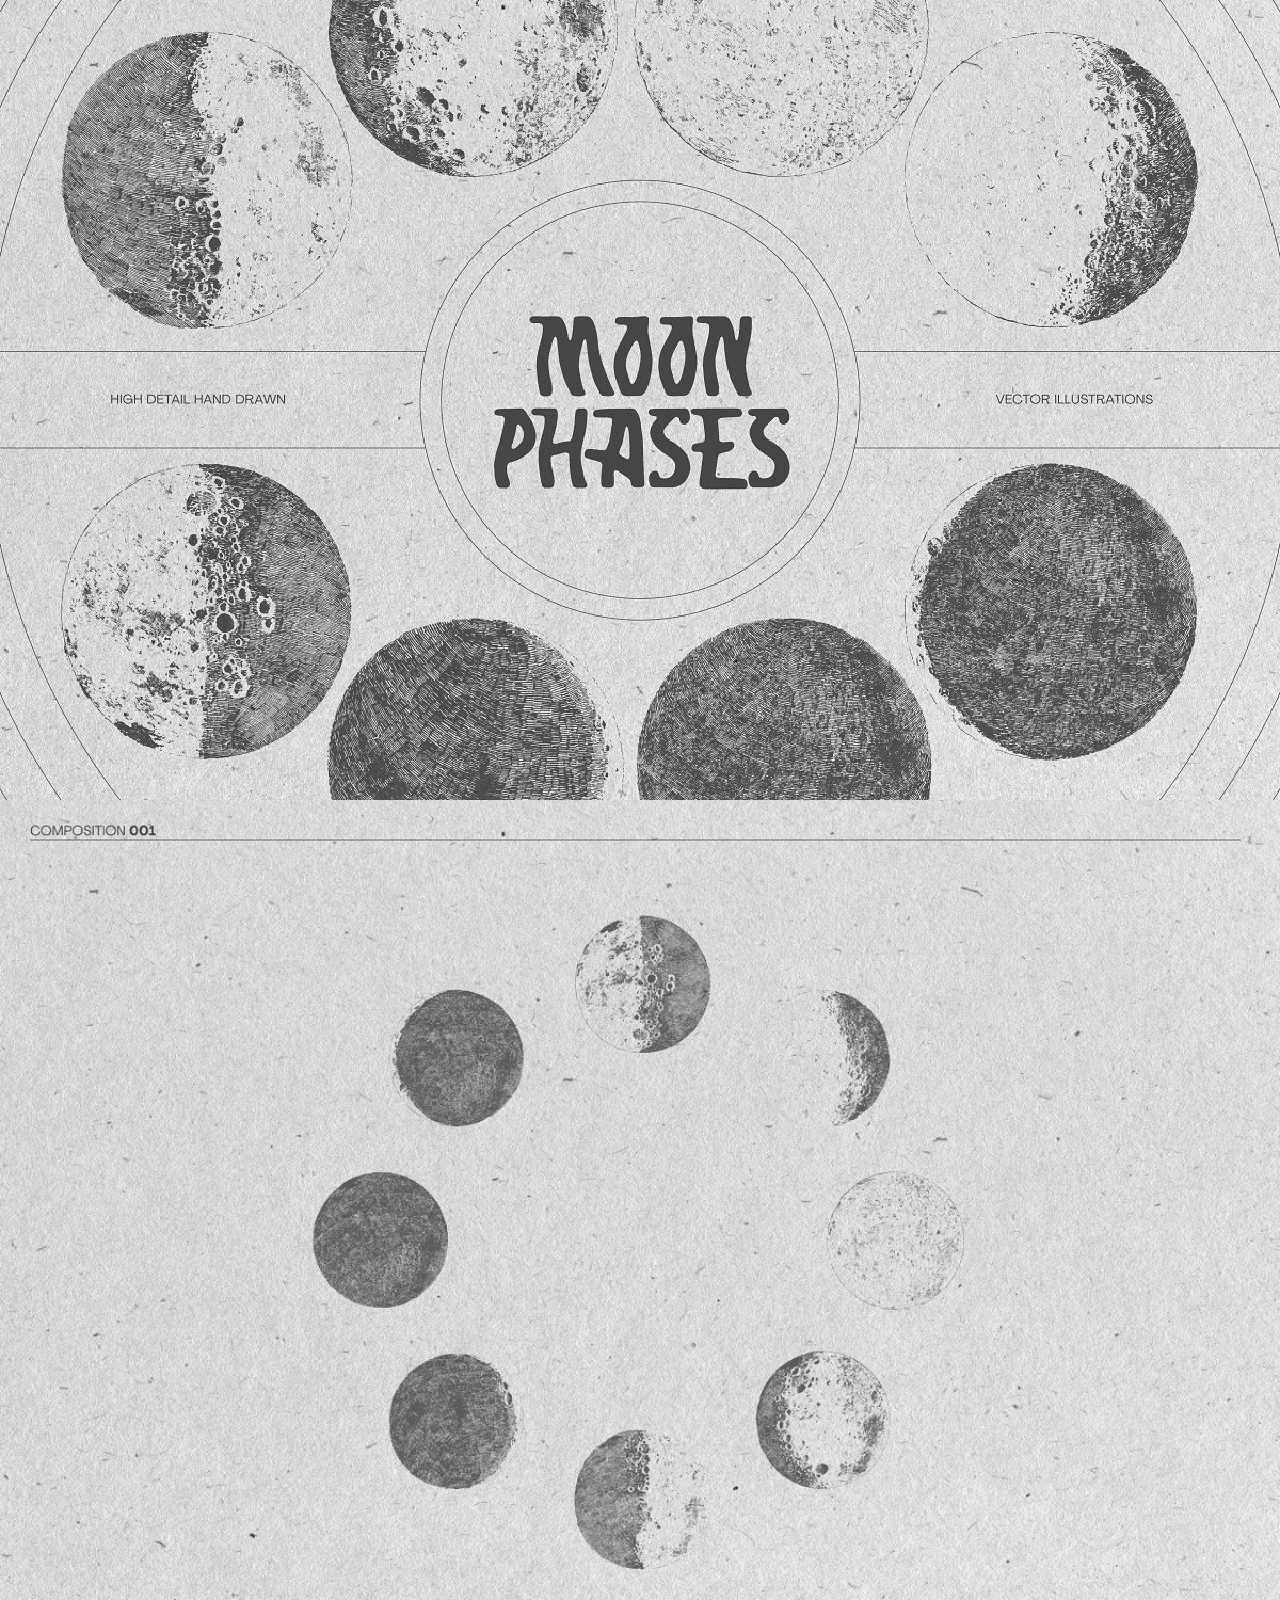 Illustrations of the moon phases pinterest image.